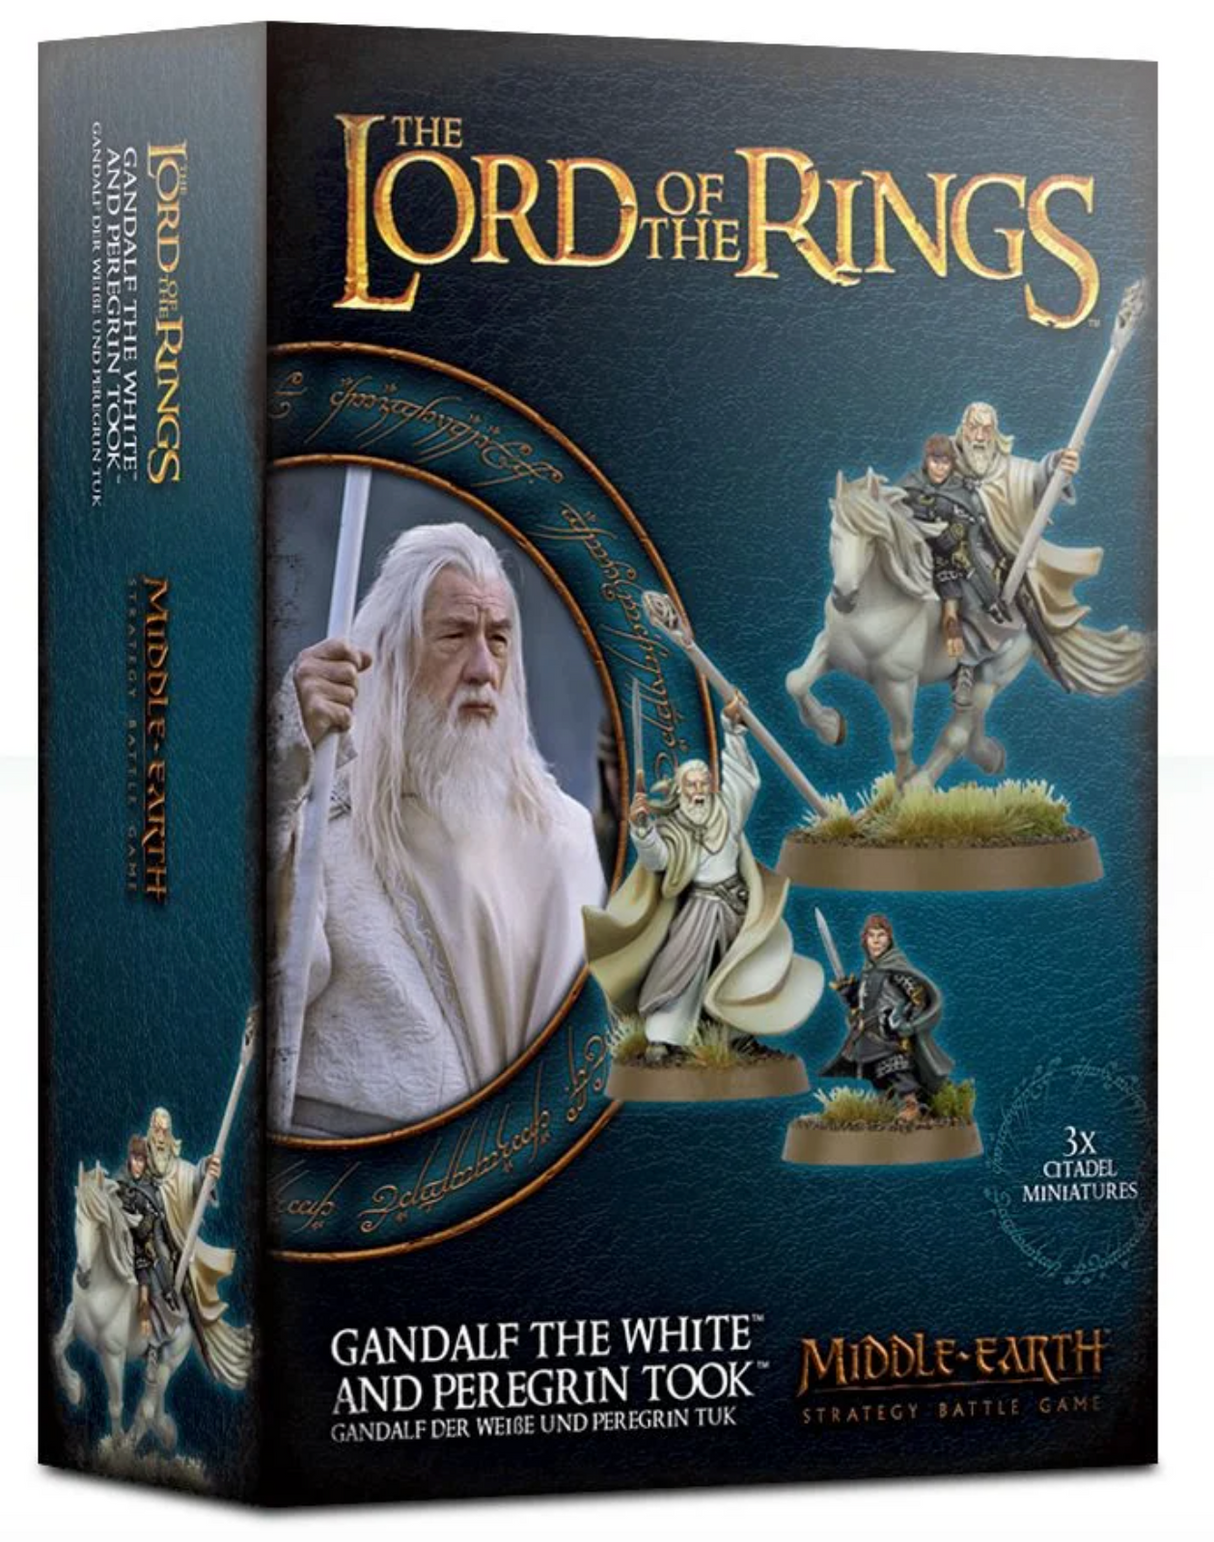 The Lord Of The Rings: Gandalf the White and Peregrin Took